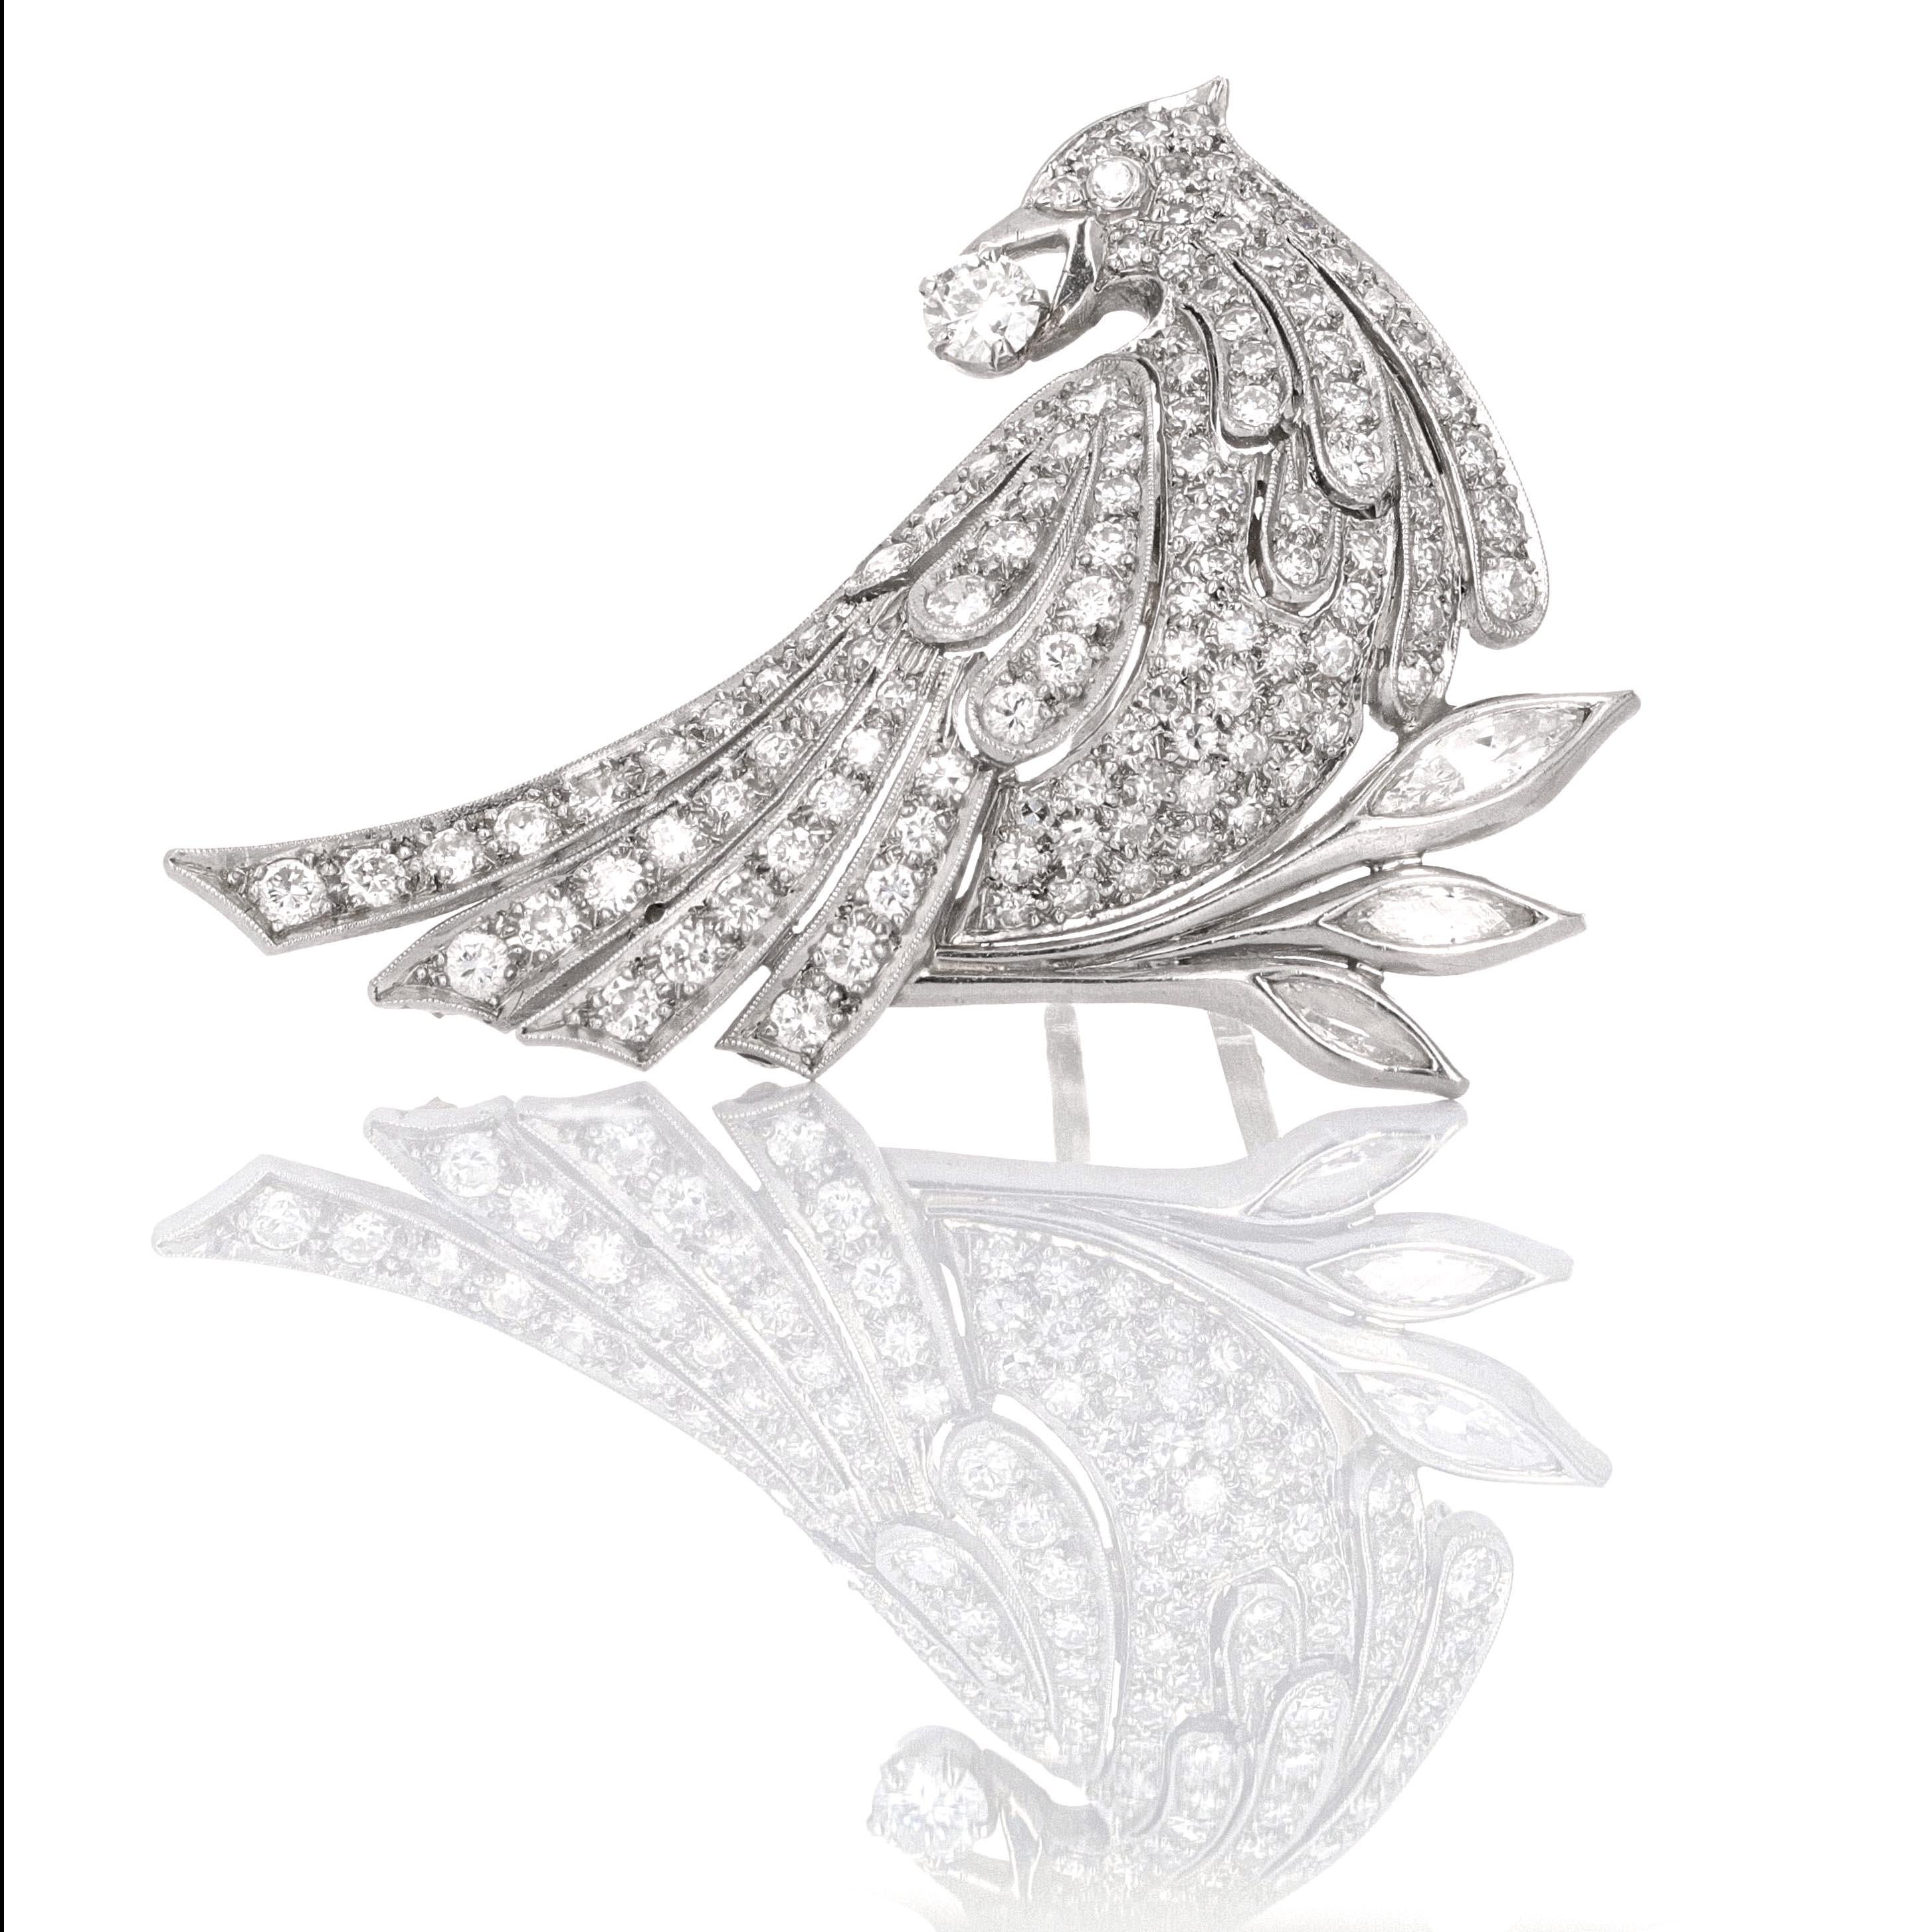 An impressive pair of platinum diamond bird brooches/ lapel pins. They are in mint condition and more beautiful in person than the picture. The pins have an estimated 6.00 carats of white, eye clean diamods.
